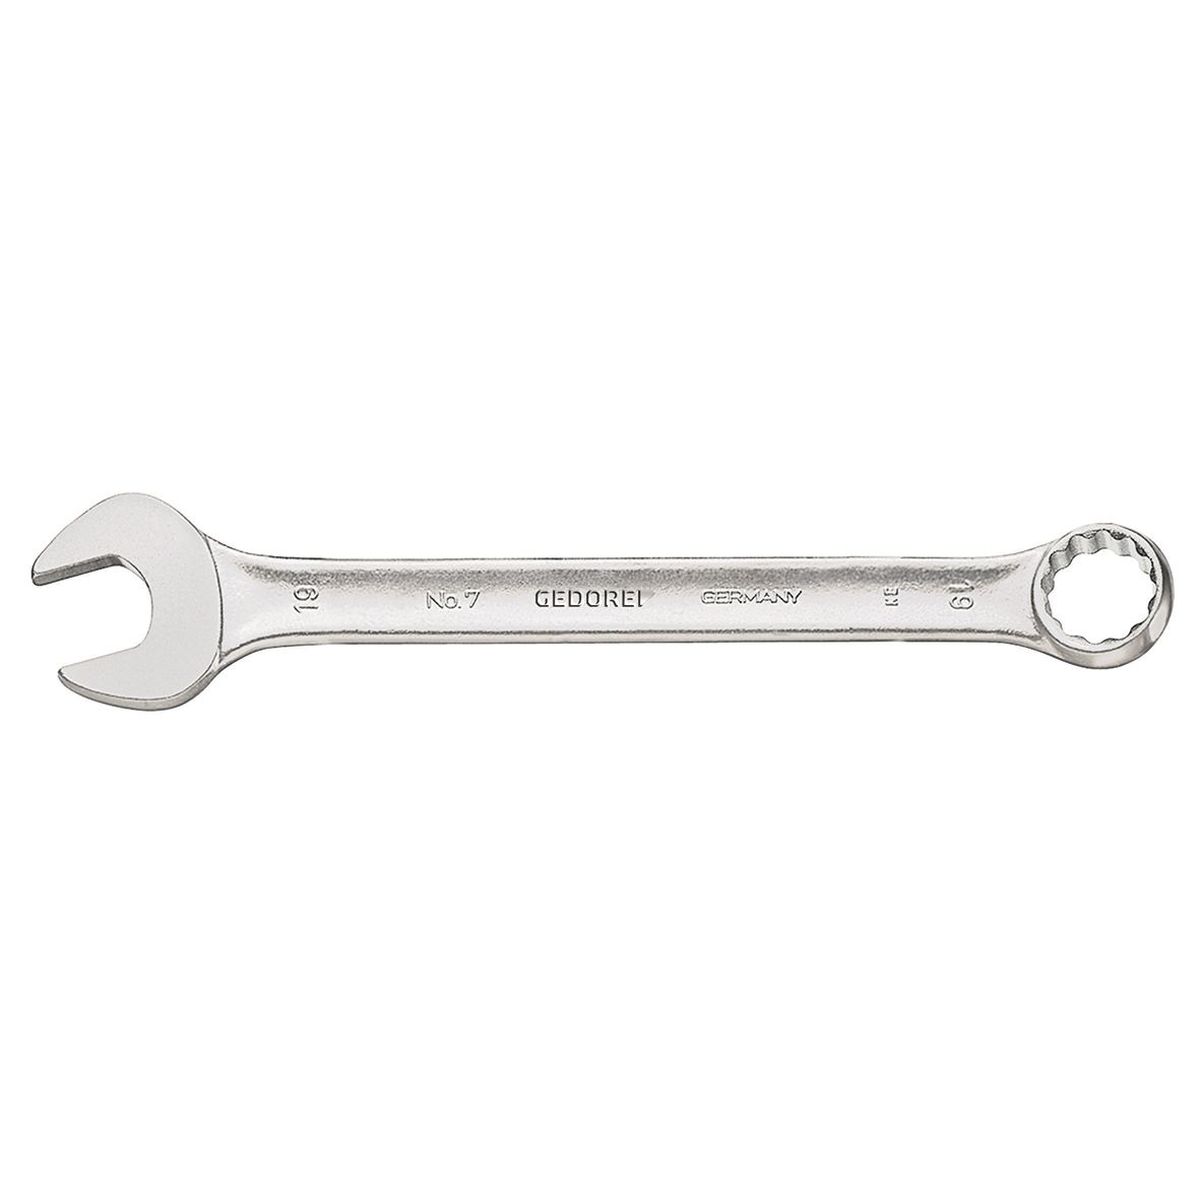 Combination spanner 19mm No.7 19 Gedore